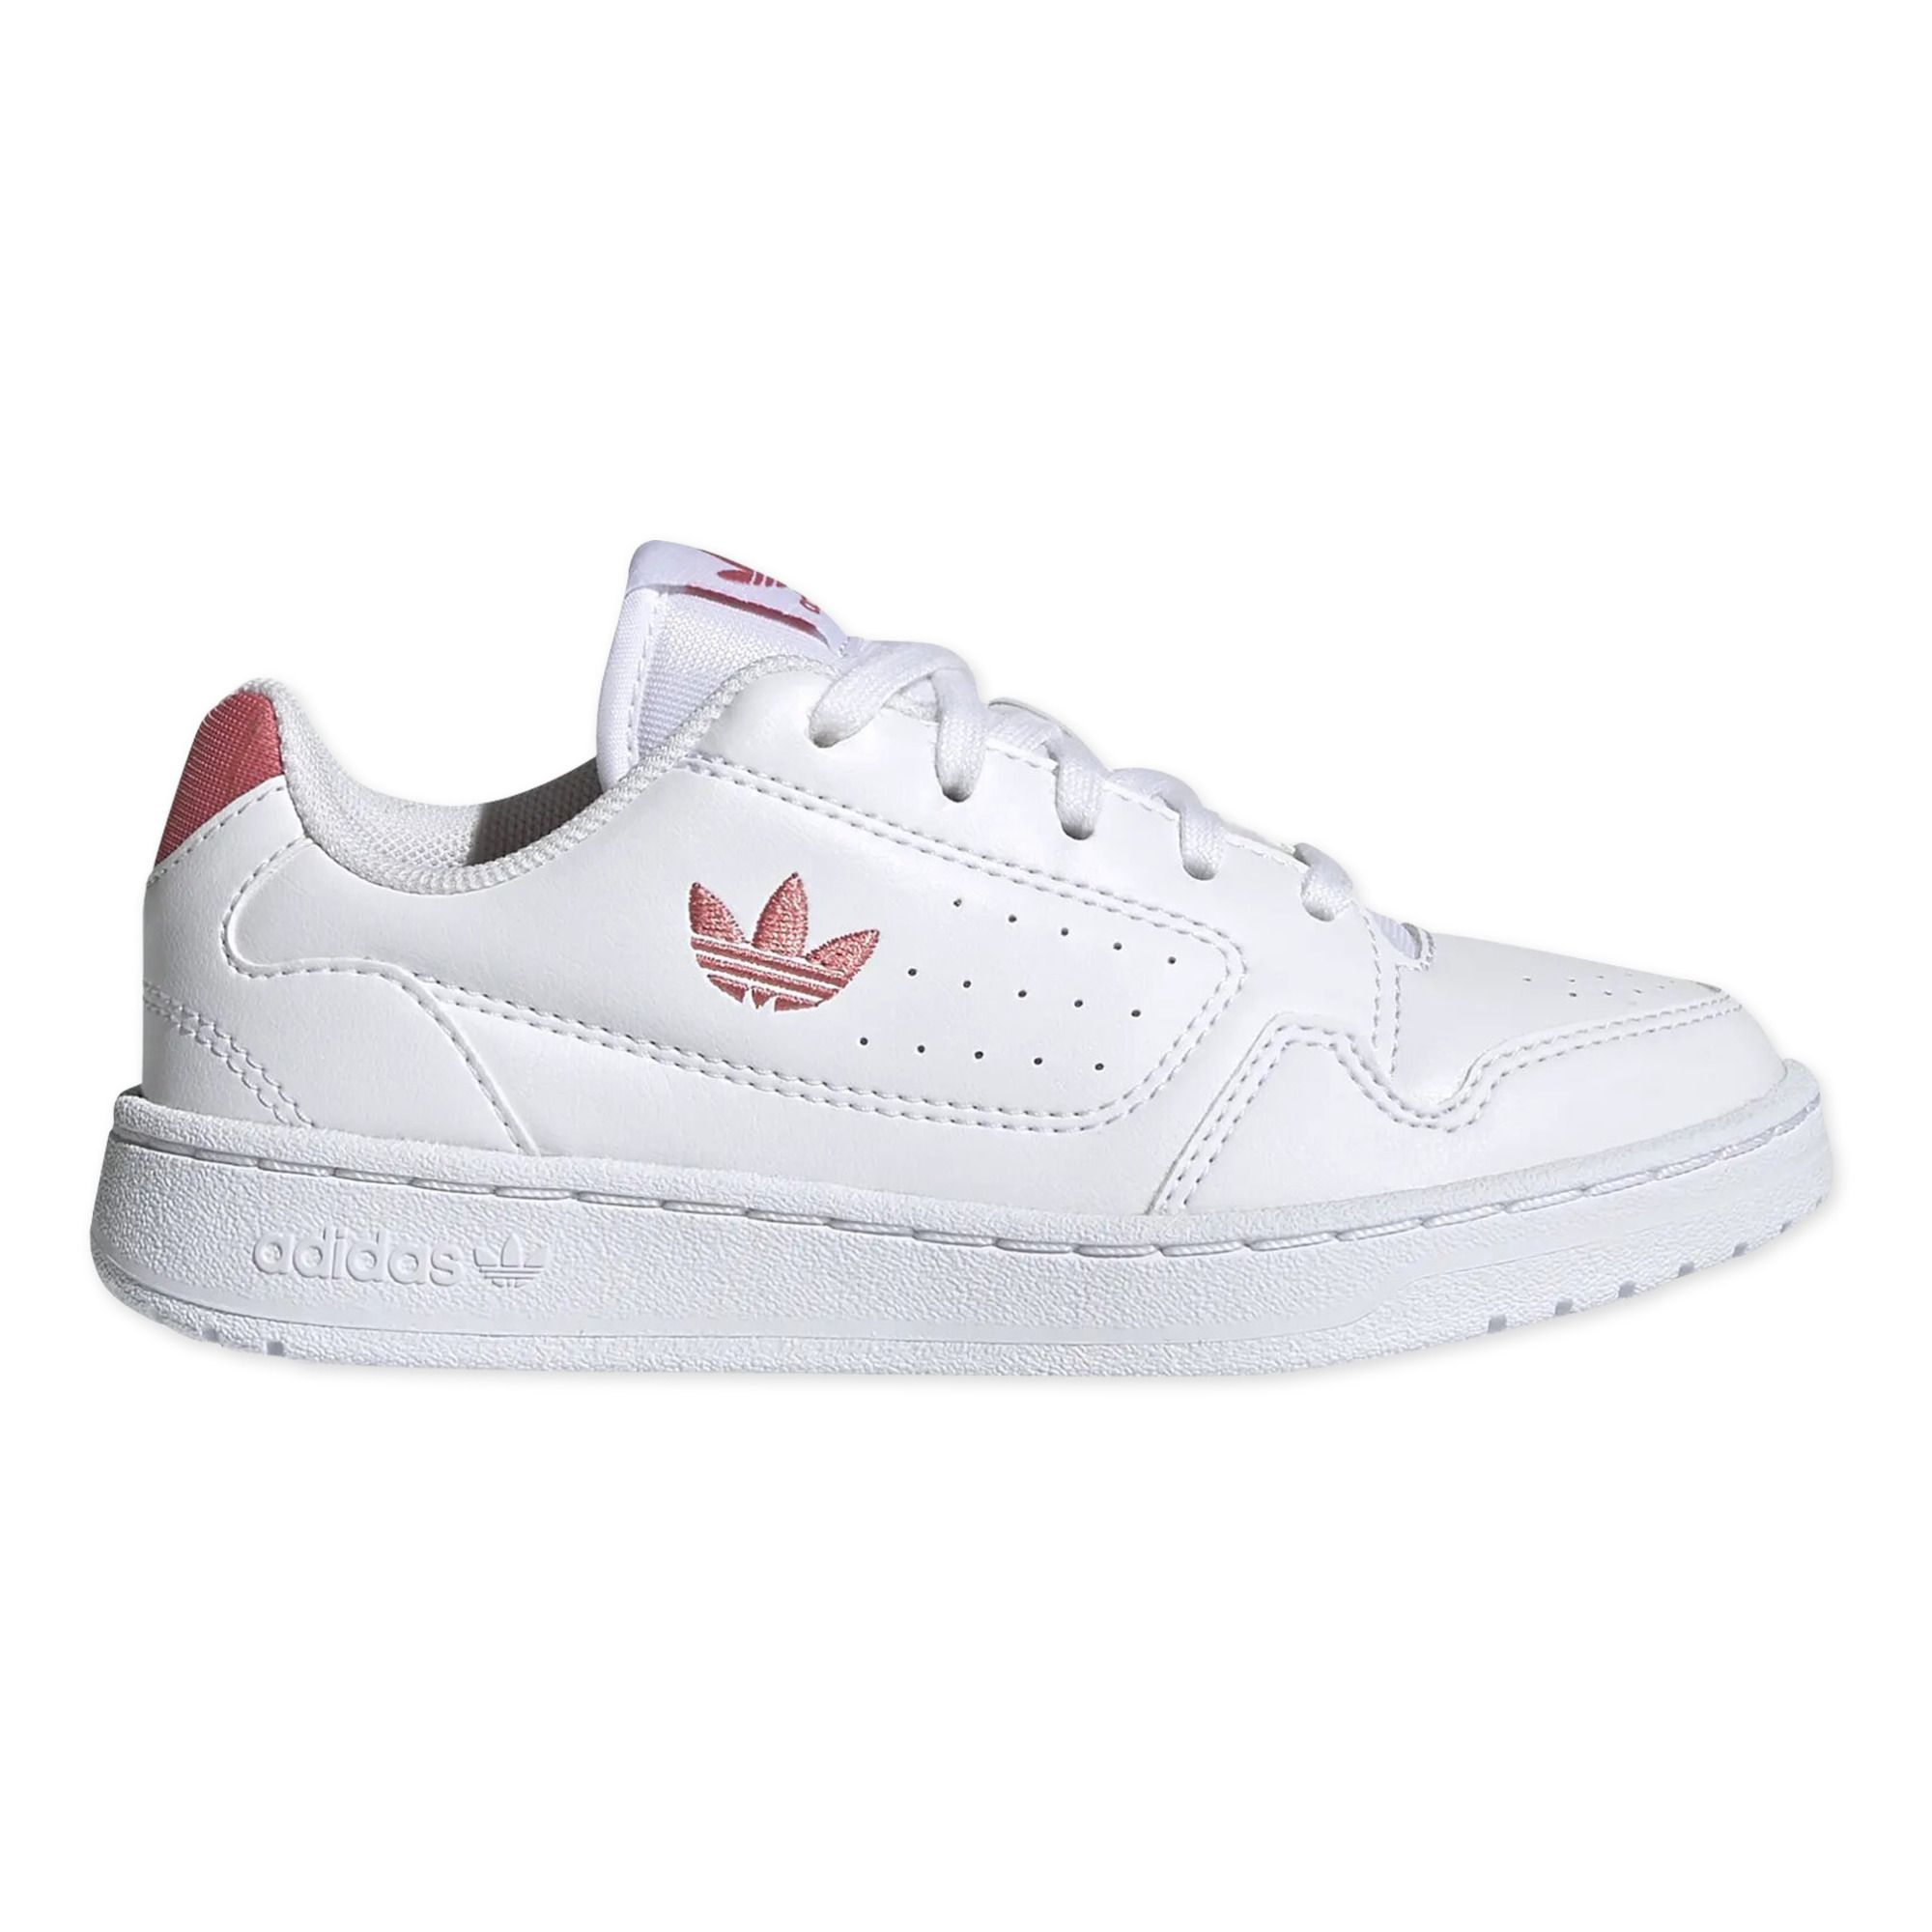 Adidas - Baskets Lacets NY90 - Fille - Rose